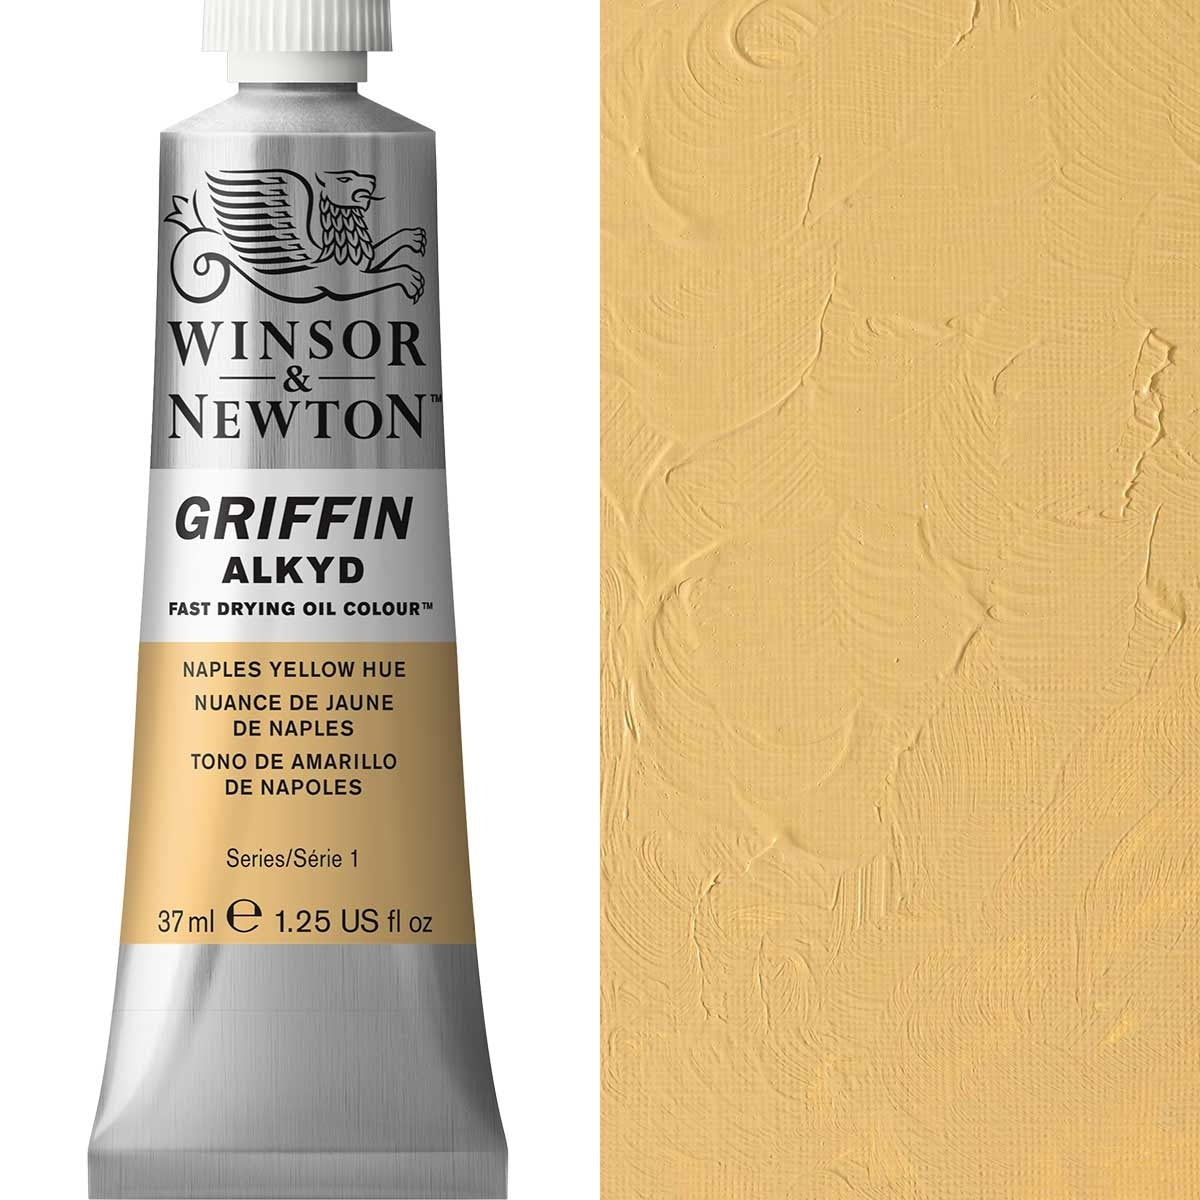 Winsor and Newton - Griffin ALKYD Oil Colour - 37ml - Naples Yellow